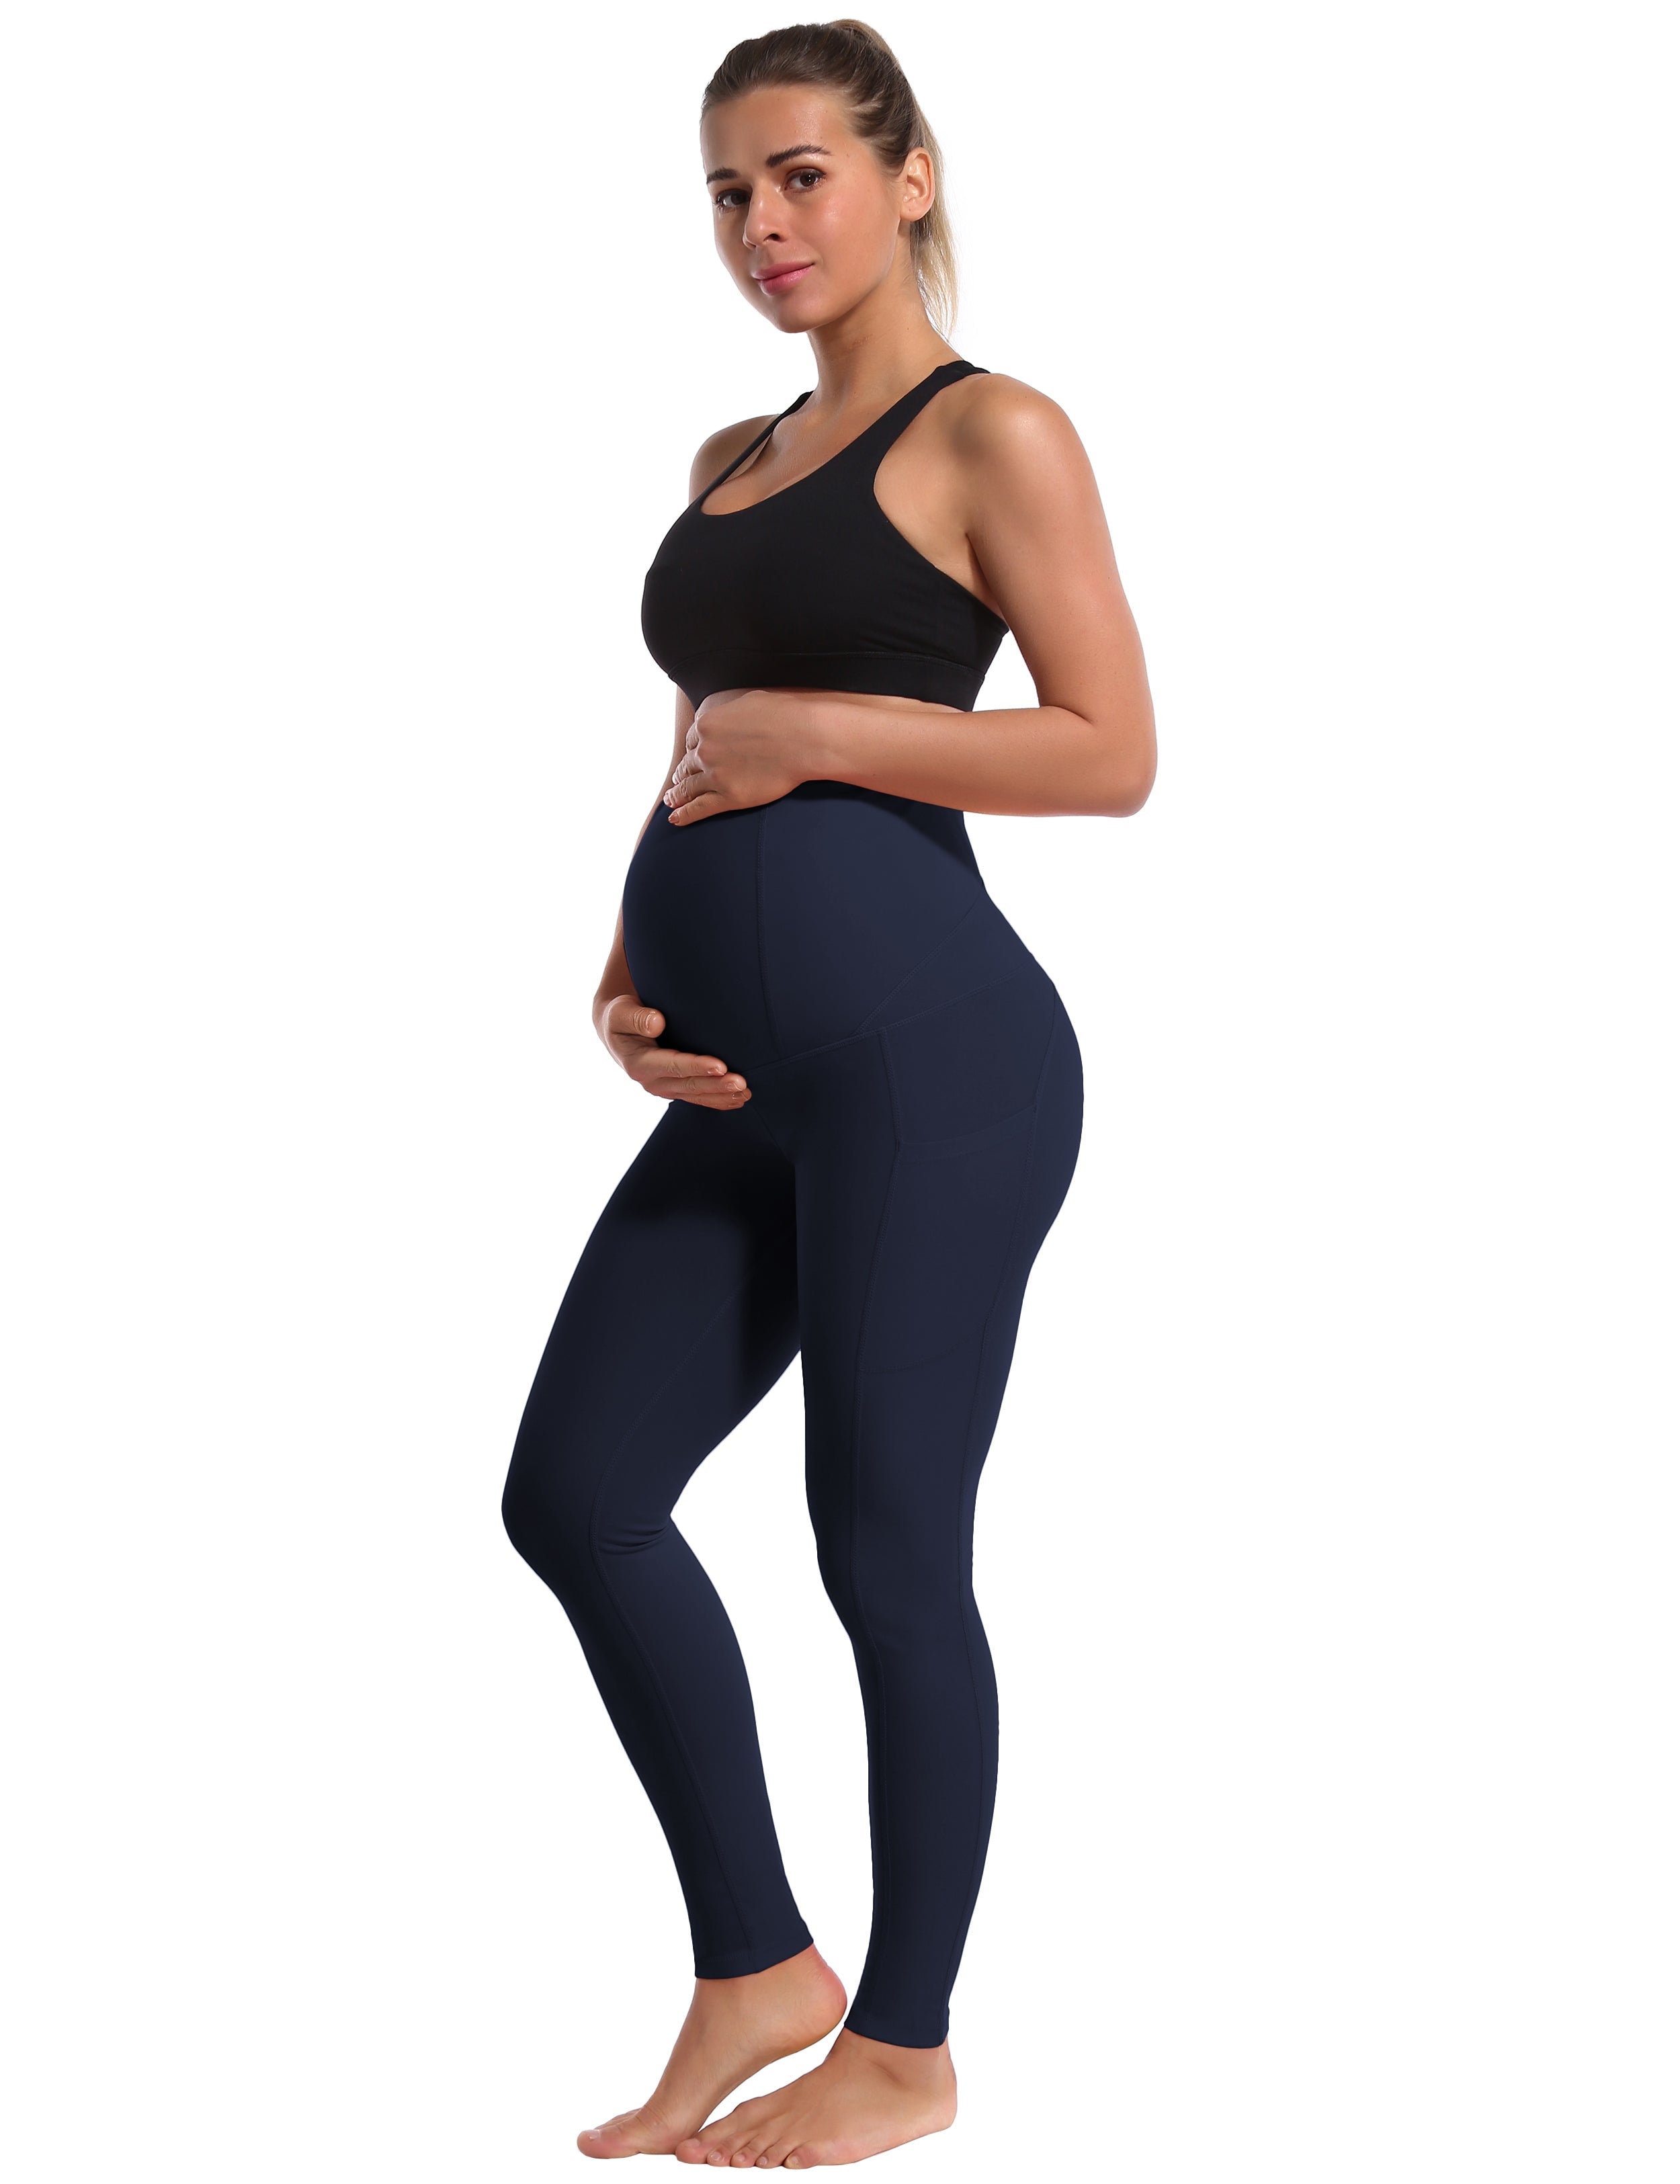 26" Side Pockets Maternity Biking Pants darknavy 87%Nylon/13%Spandex Softest-ever fabric High elasticity 4-way stretch Fabric doesn't attract lint easily No see-through Moisture-wicking Machine wash